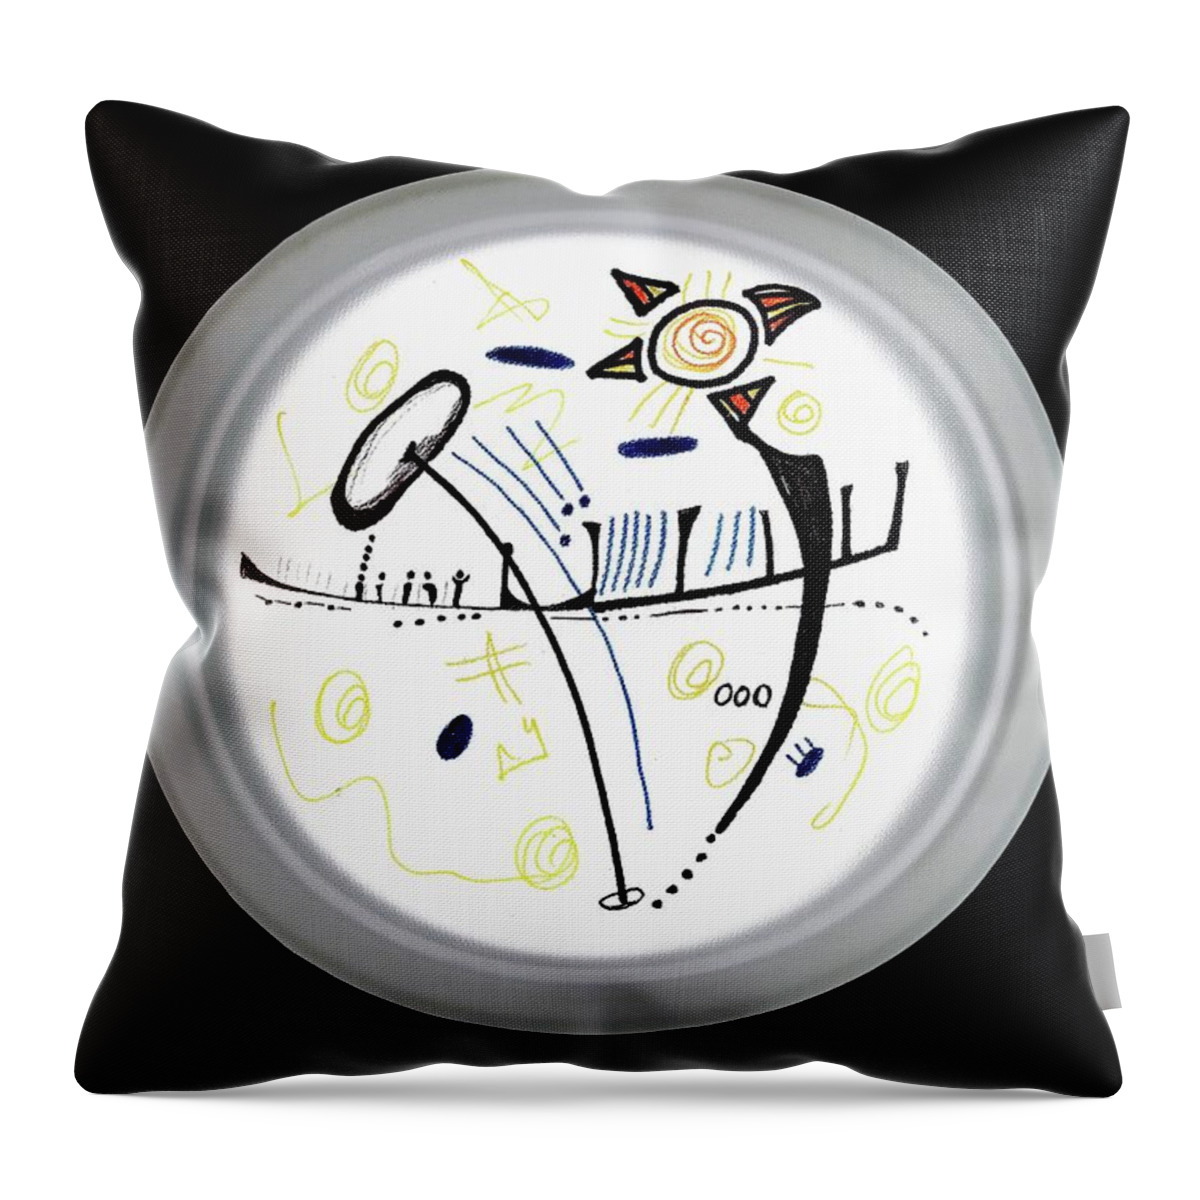  Throw Pillow featuring the digital art Scribble on a plate by Gustavo Ramirez